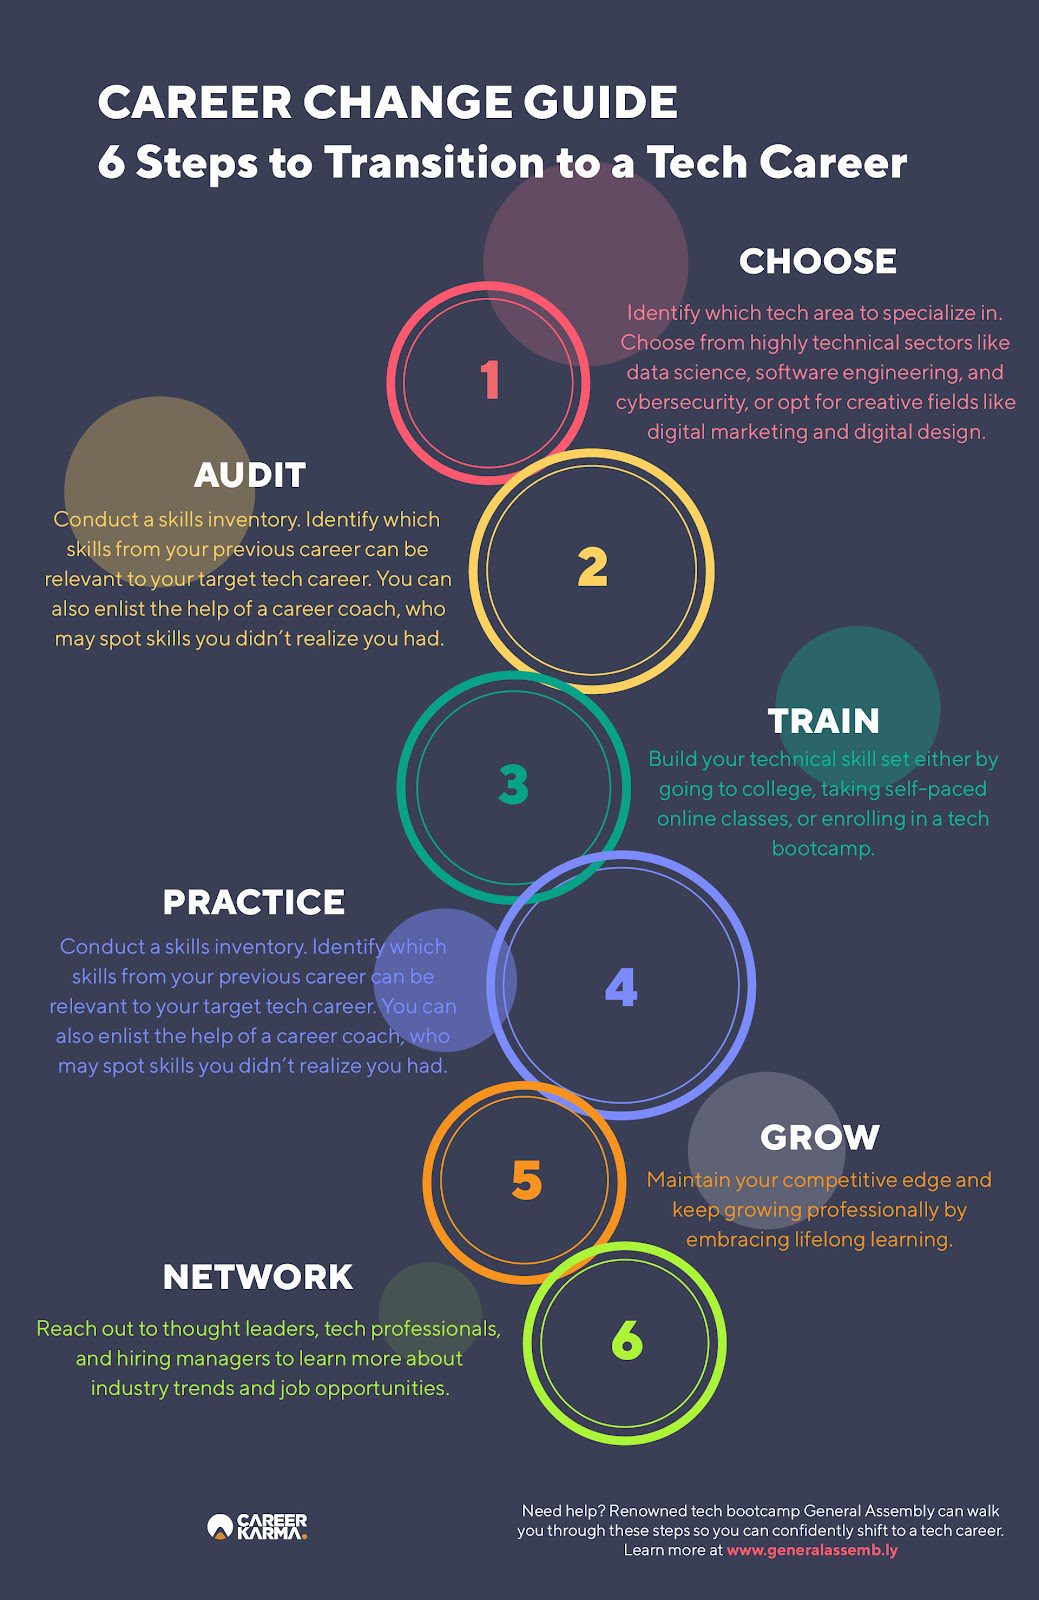 An infographic highlighting six actionable steps for a successful career change to tech